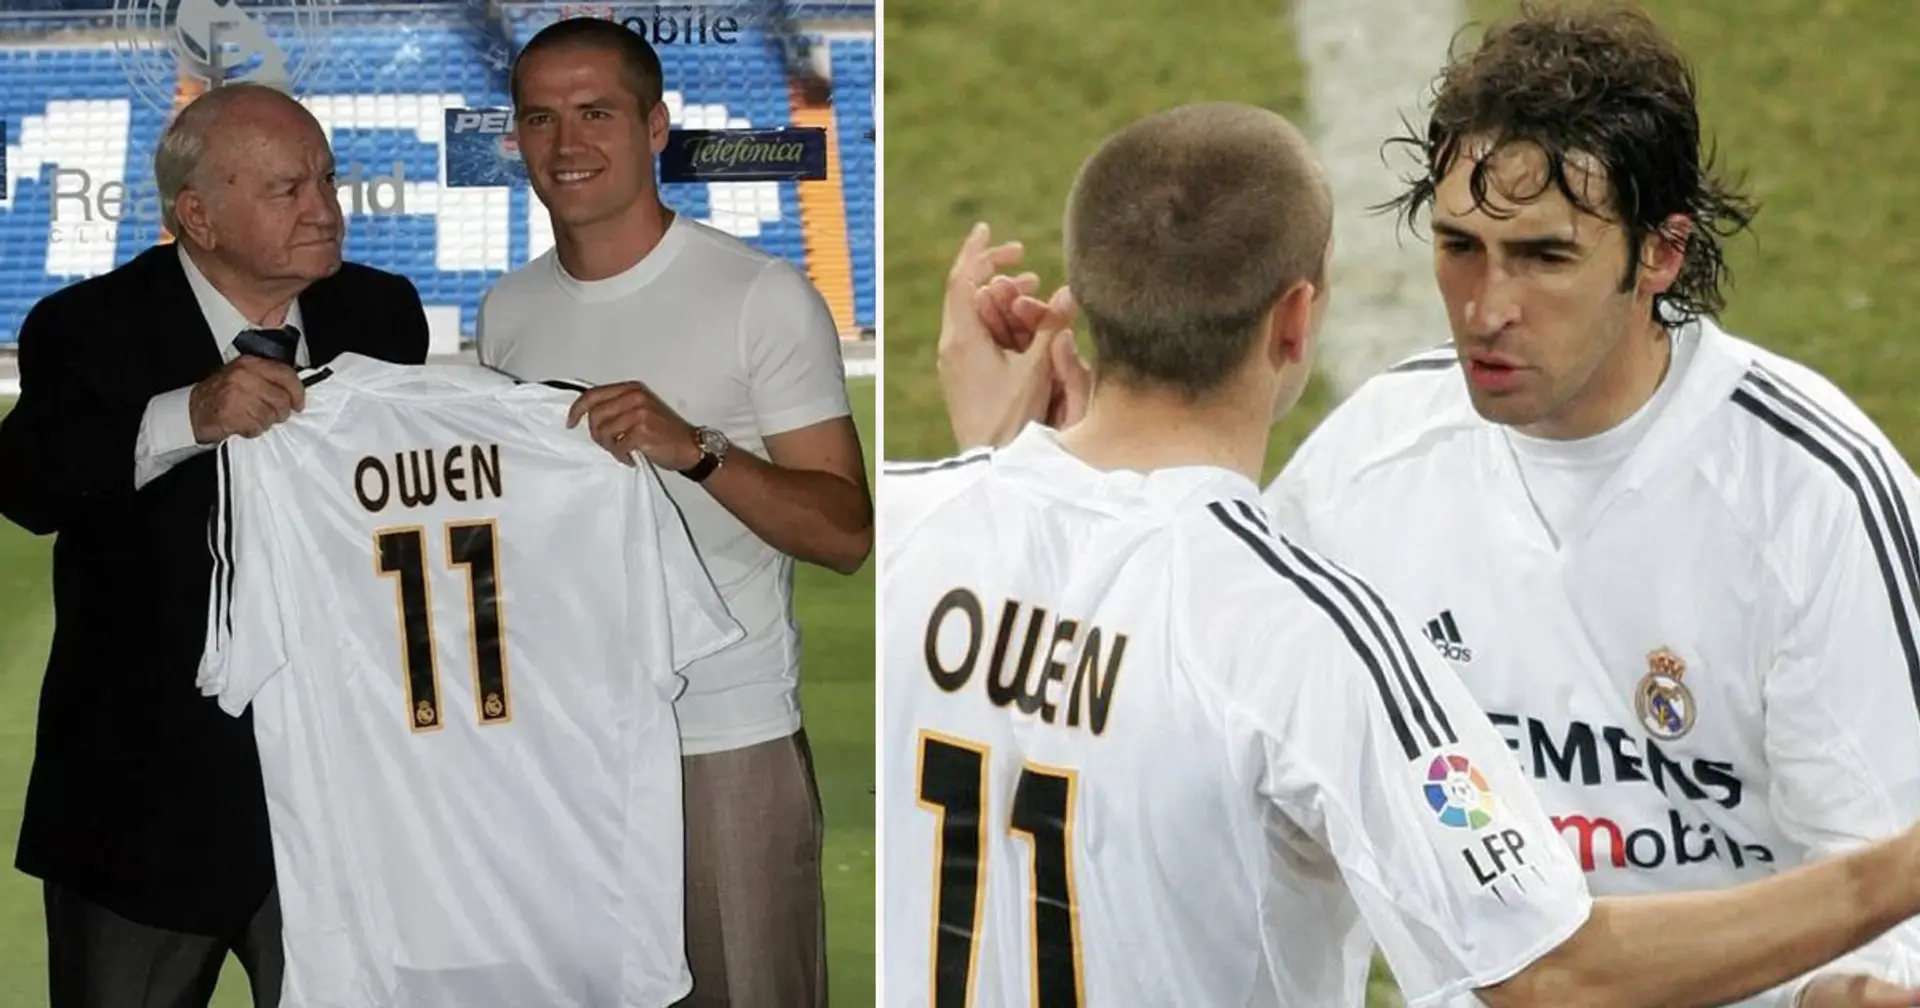 'I will knock them out!': Owen reveals cocky plan for Raul and Ronaldo when he joined Real Madrid